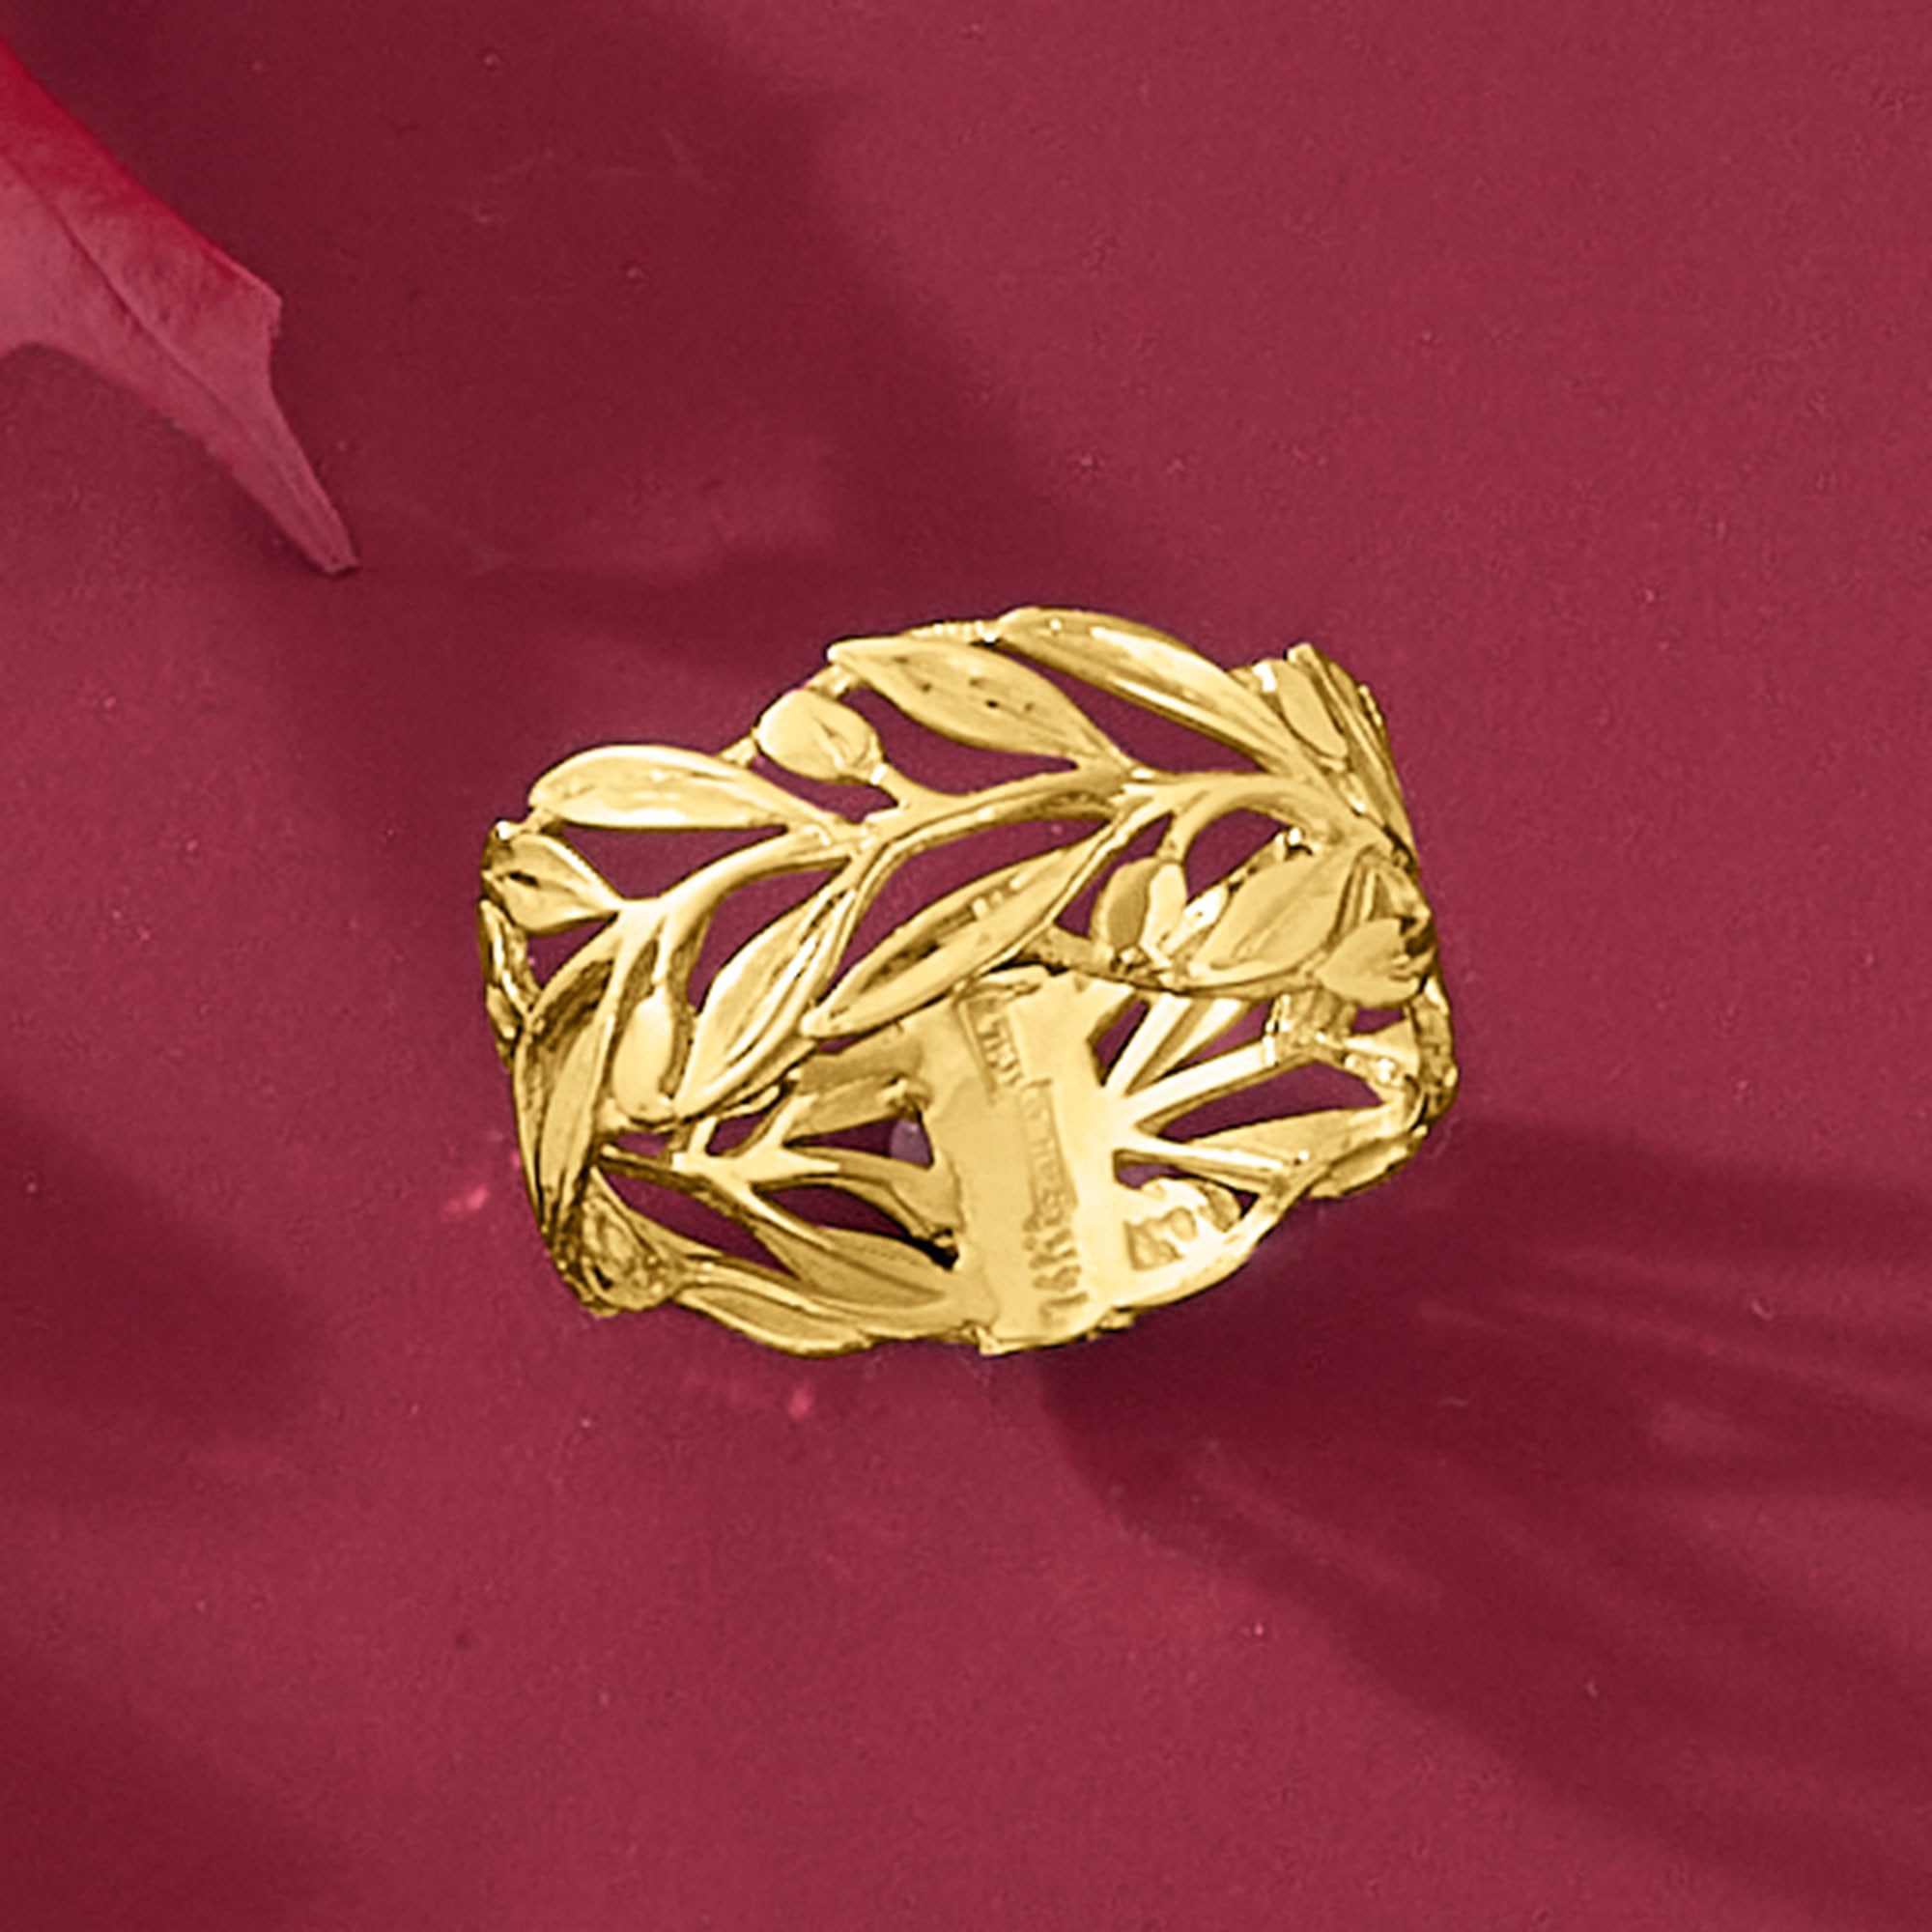 Open Leaf Outline Ring, 18k Gold Plated Stainless Steel Ring